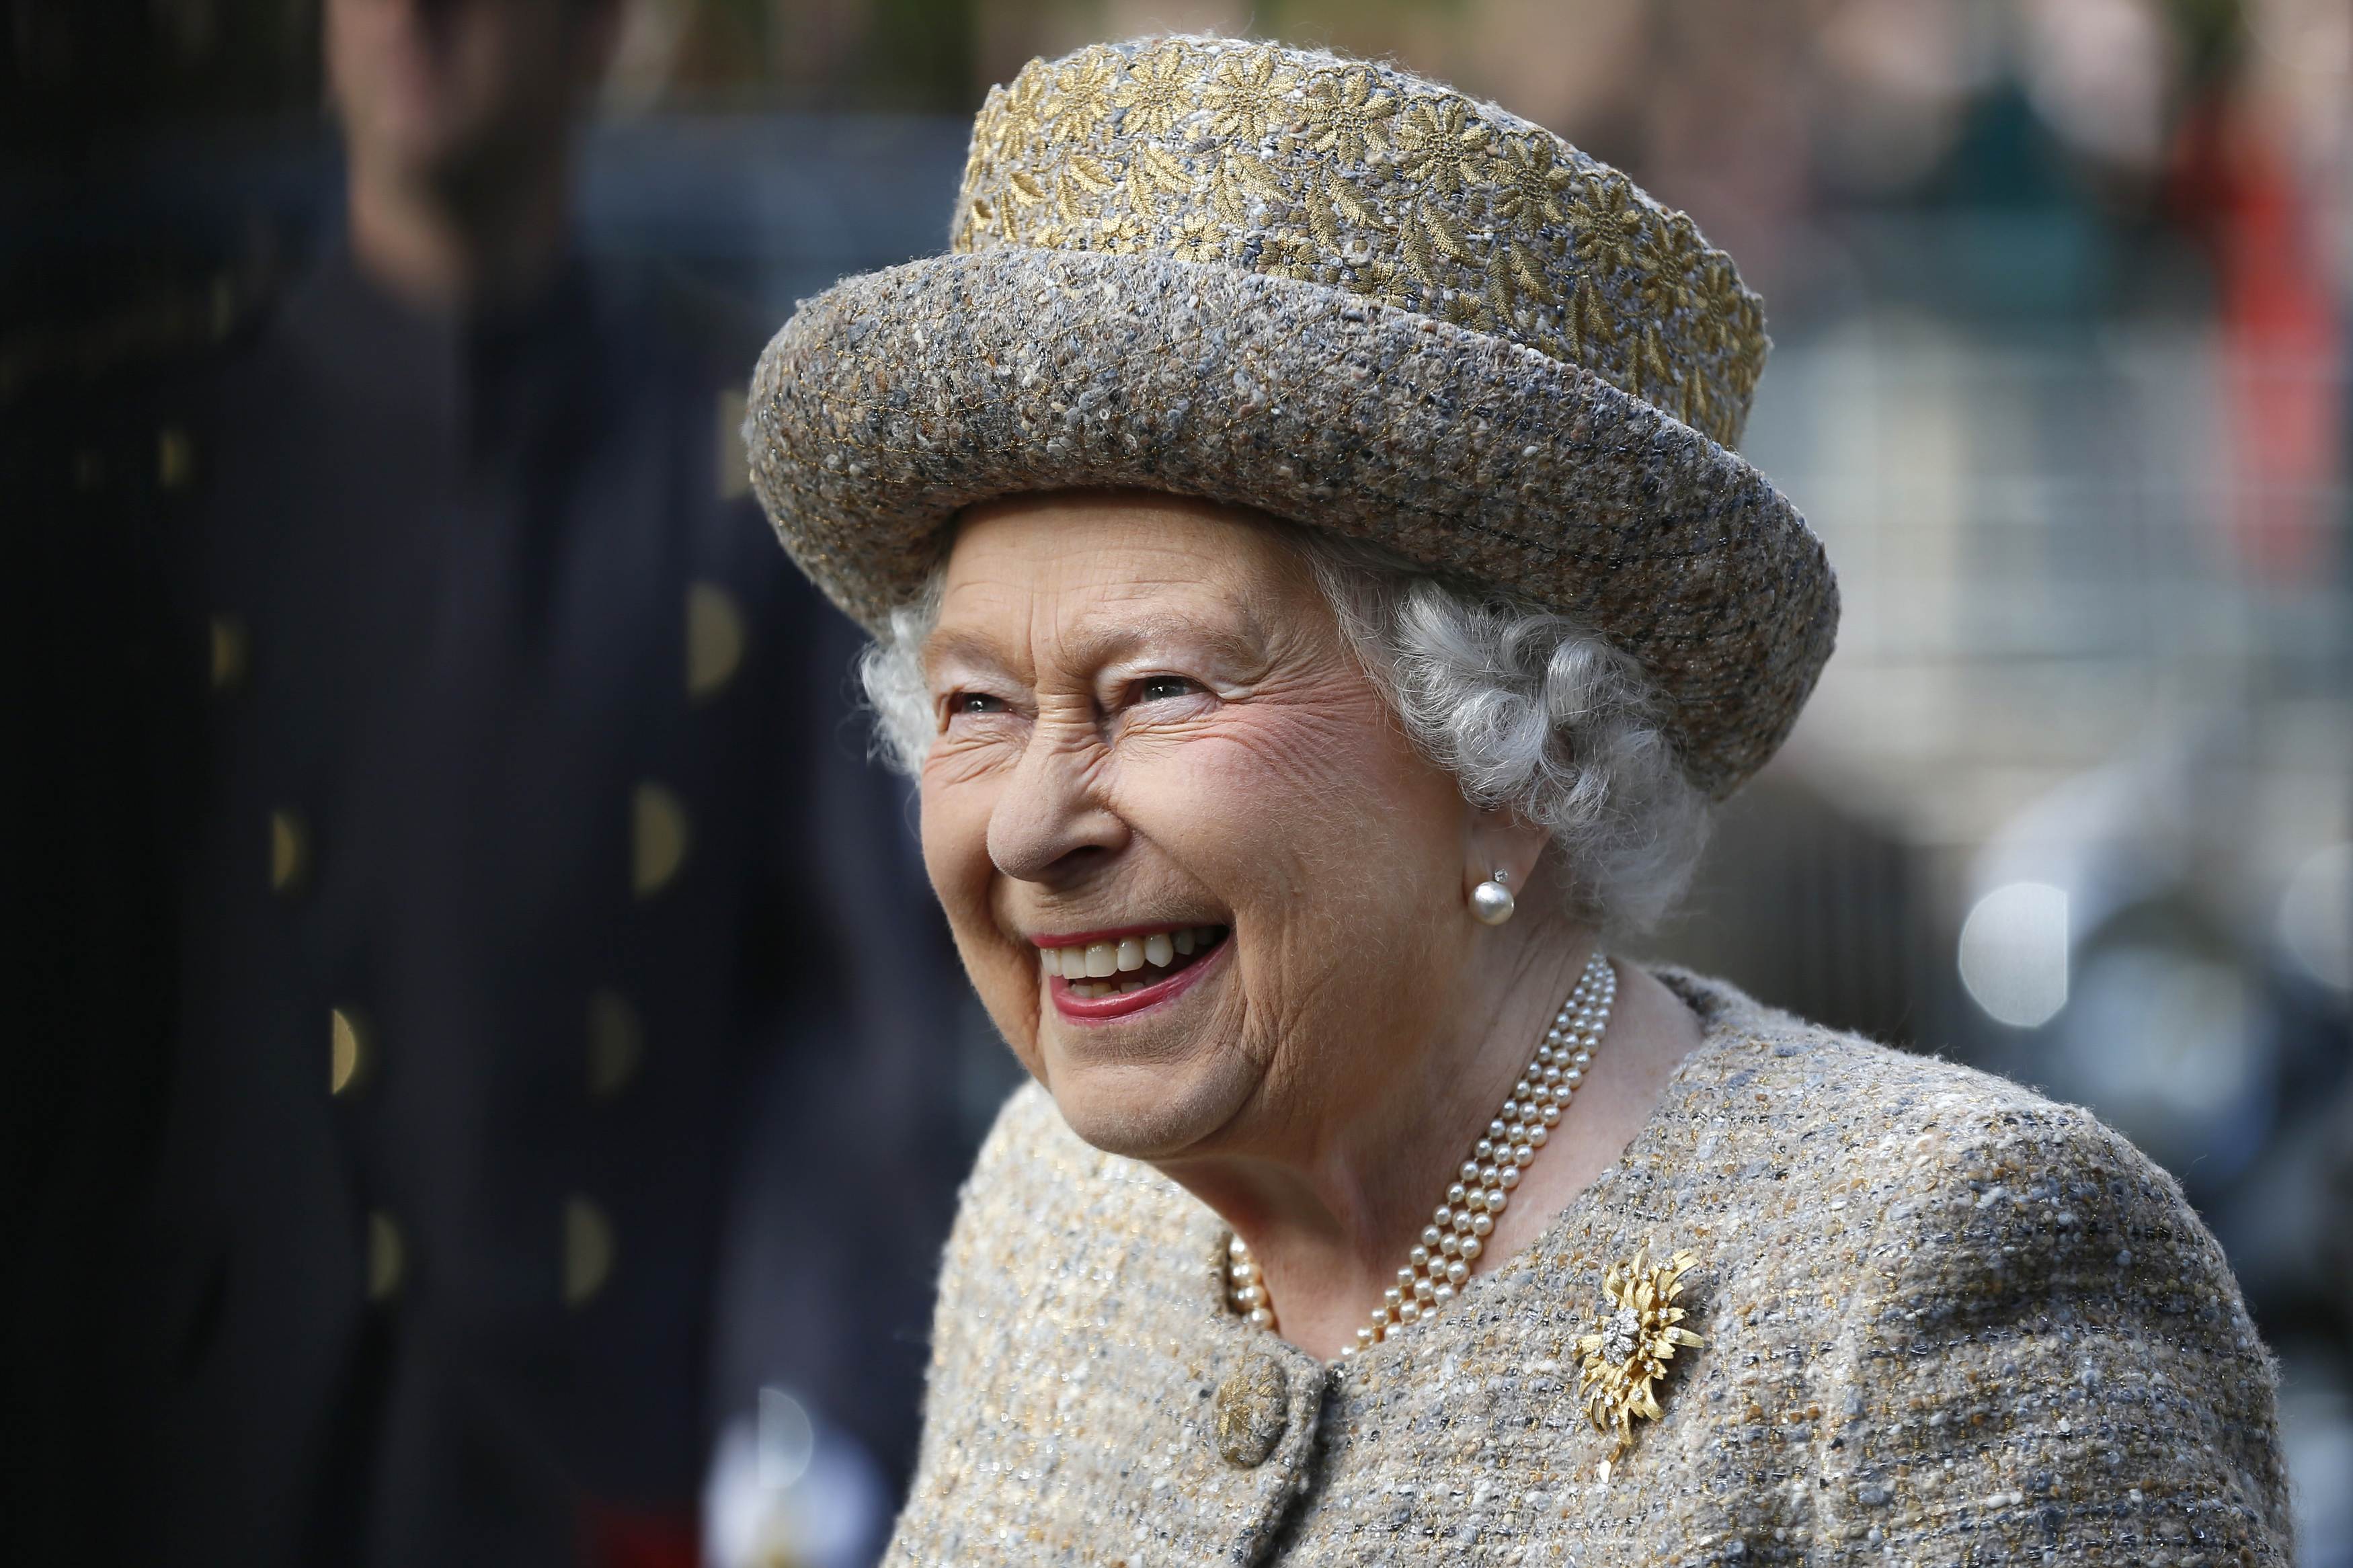 Queen Elizabeth II pictured arriving before the Opening of the Flanders' Fields Memorial Garden at Wellington Barracks on November 6, 2014 in London, England | Source: Getty Images